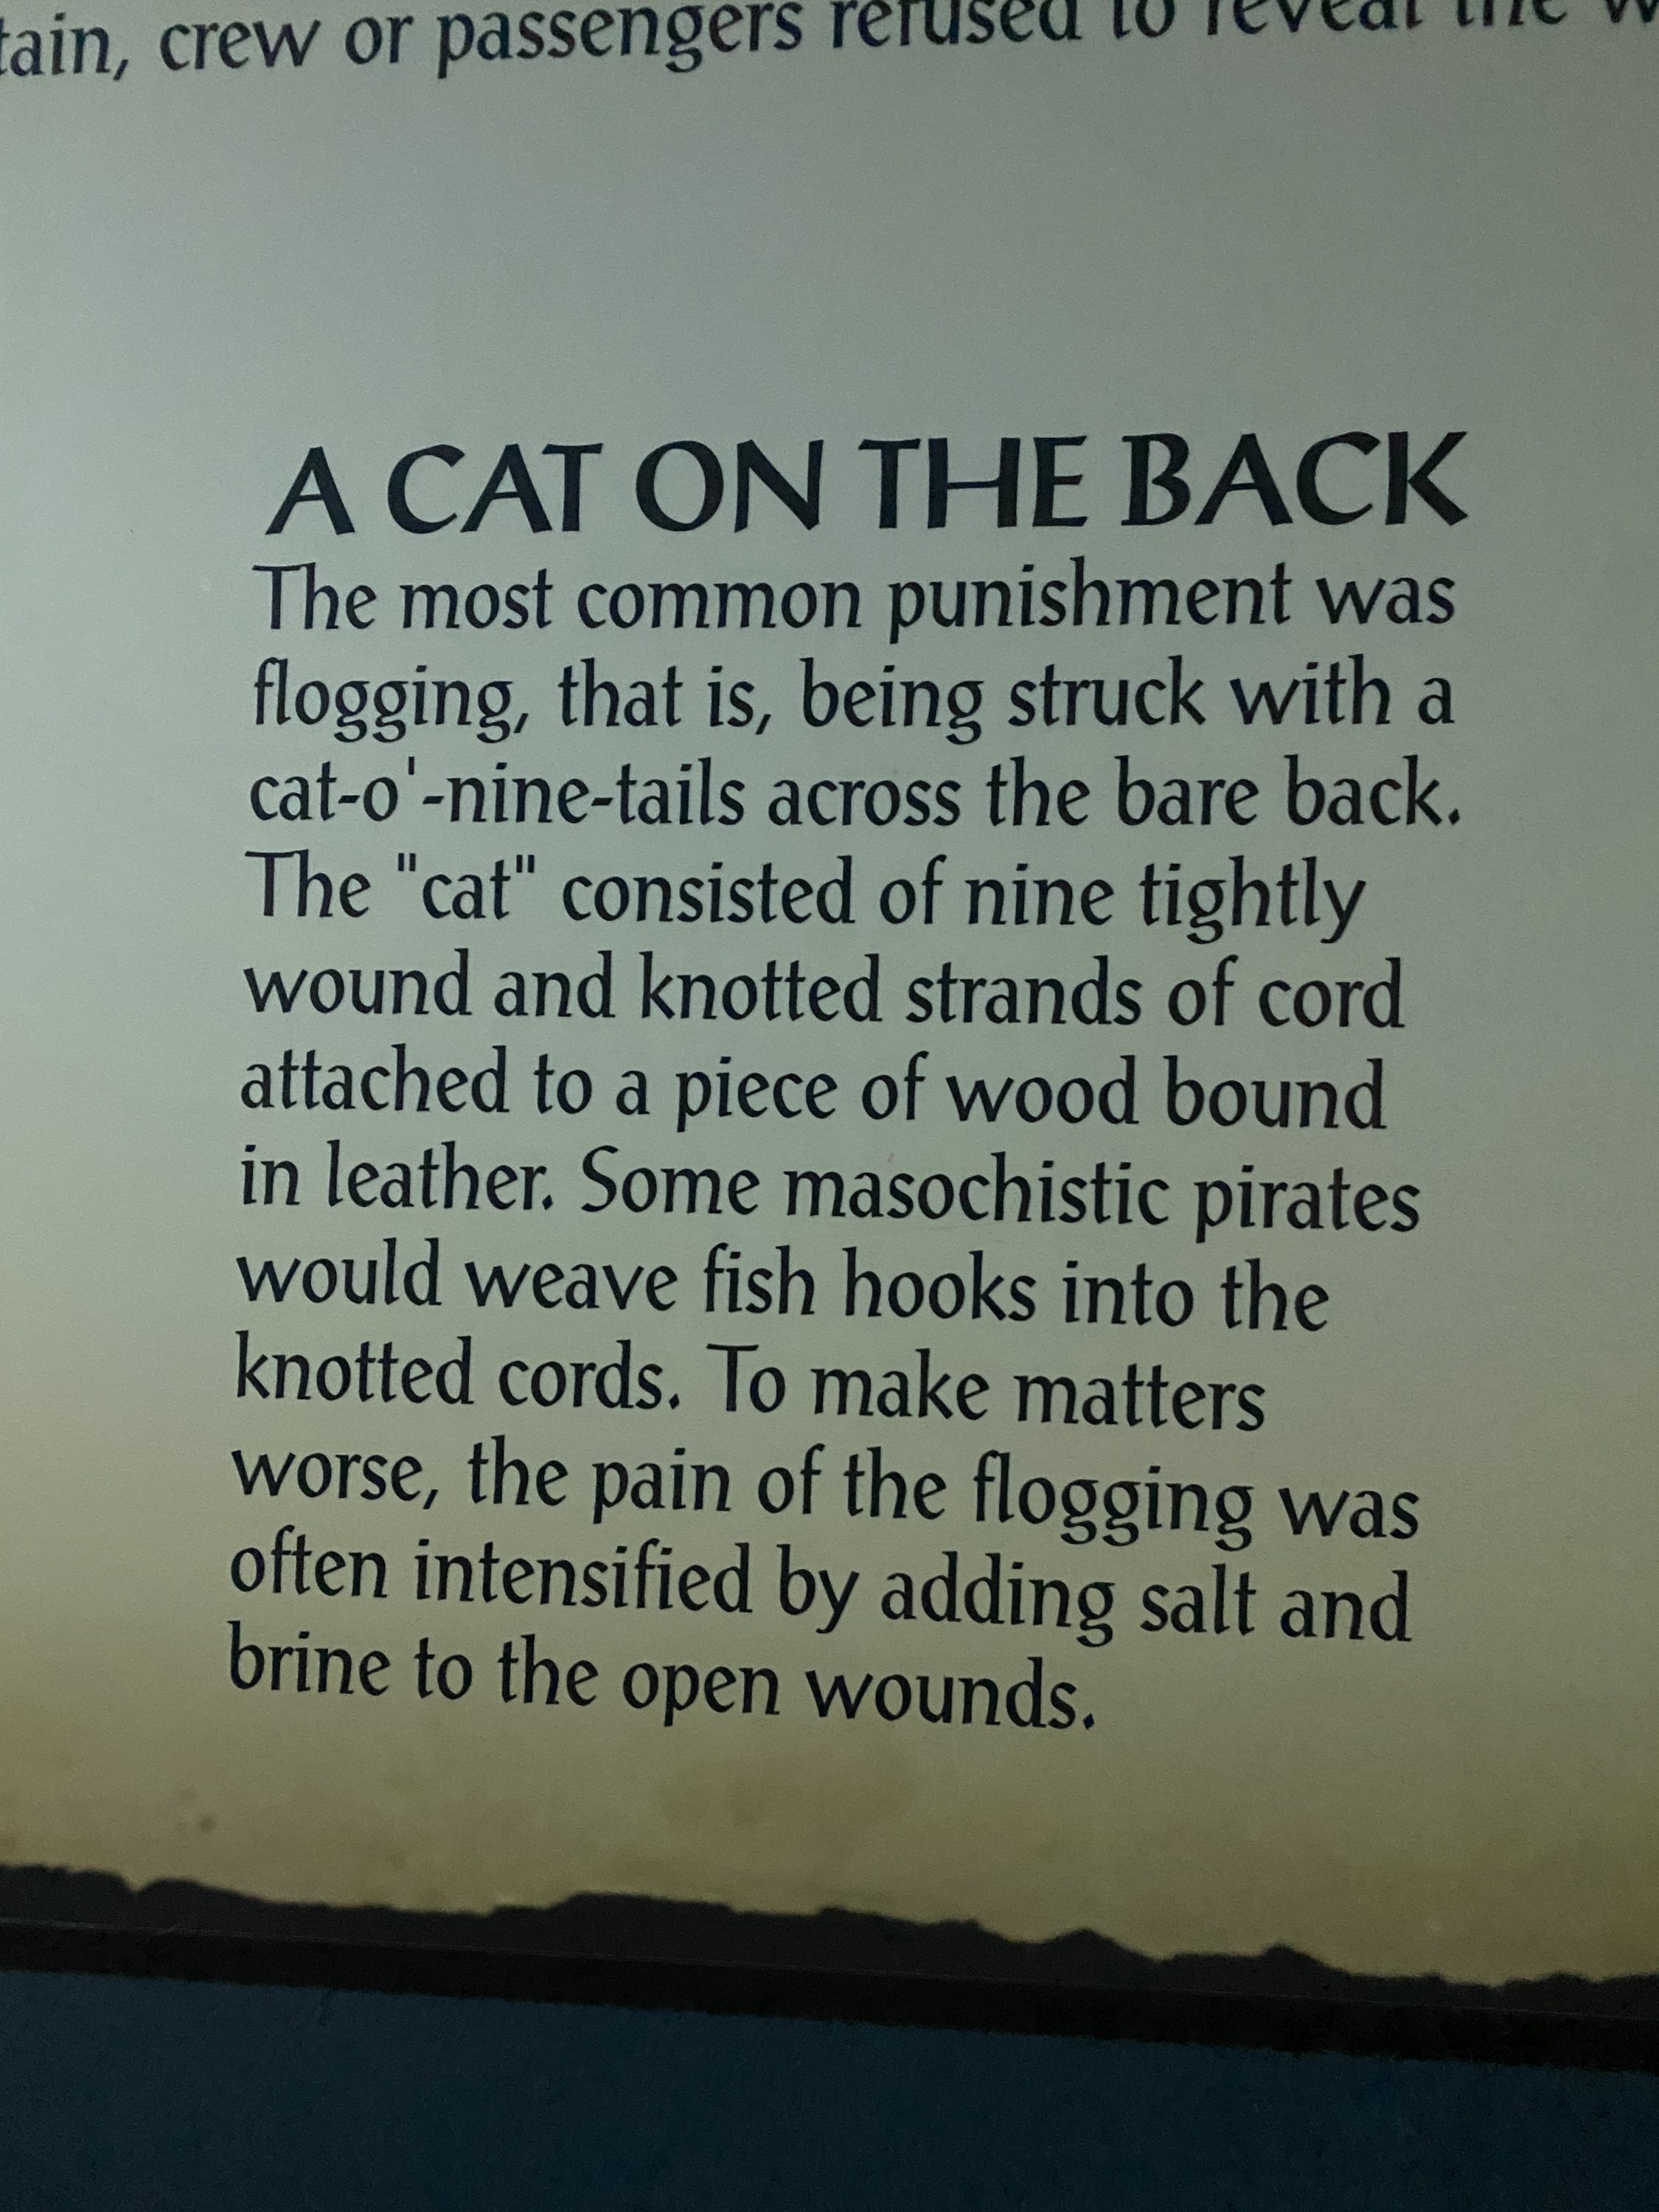 Pirates used a Cat-O-Nine-Tails as punishment - This is similar punishment that Jesus Christ was flogged with. It has often also has been called “A Cat on the Back” (Ten lashes, Nine Tails).  #Pirates #PiratesMuseum #CatONineTails #Flogging